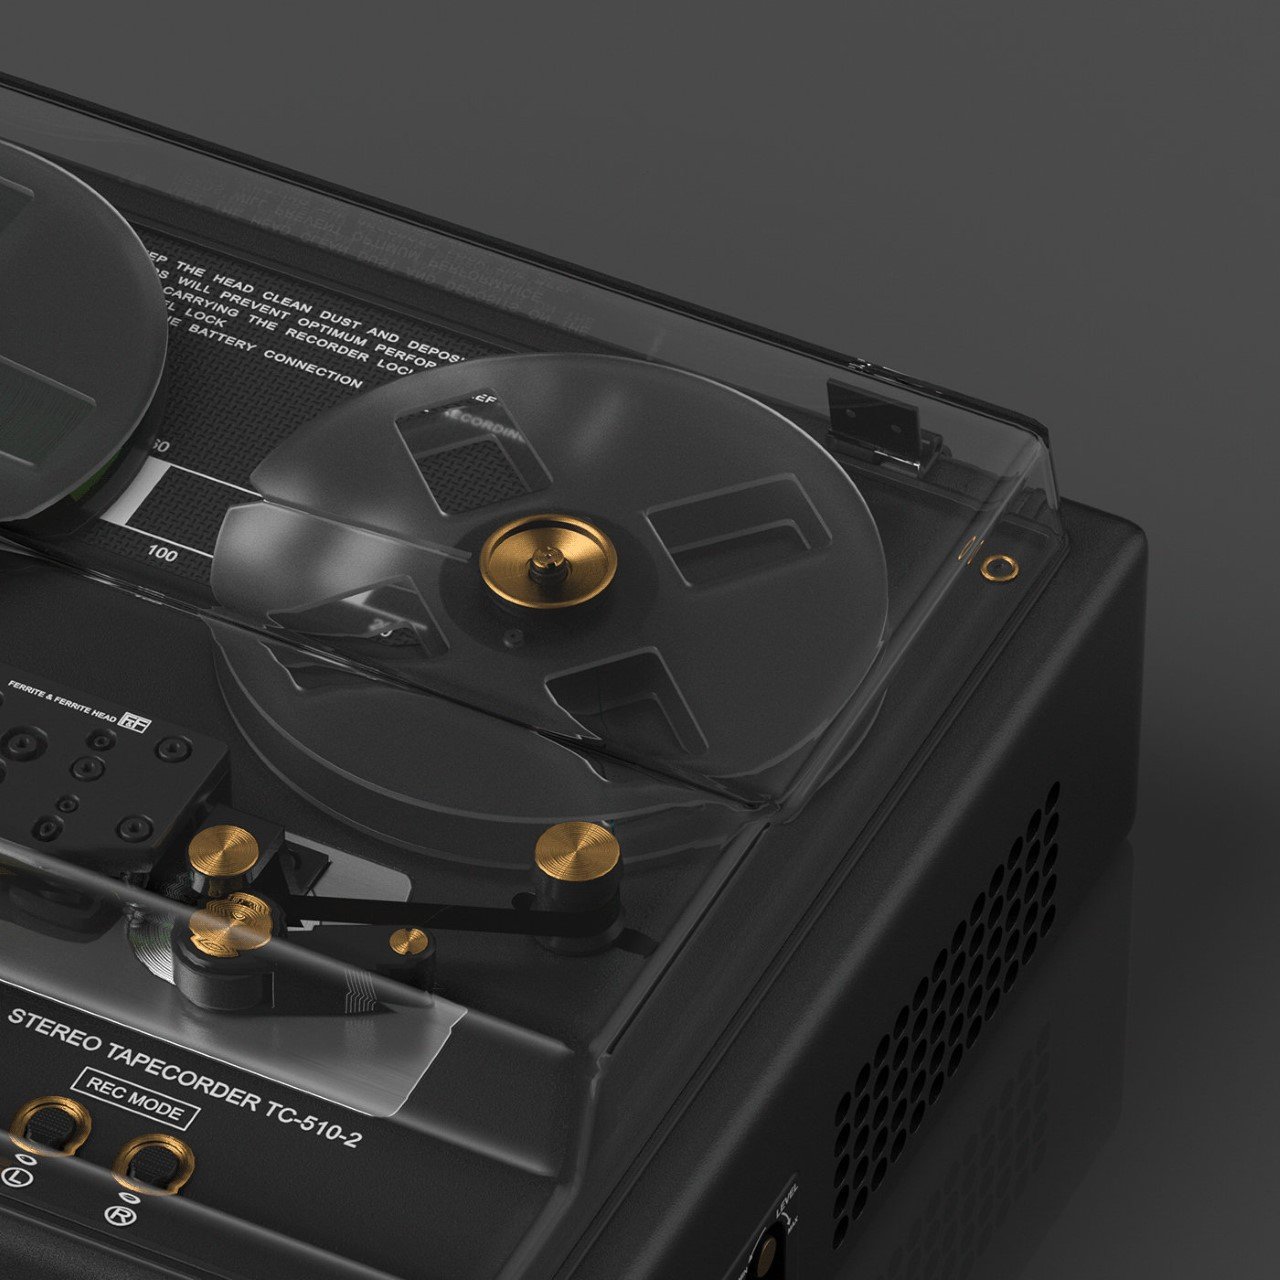 Redesigned Sony TC-510-2 Tape Recorder sports a new funky design that audiophiles will love